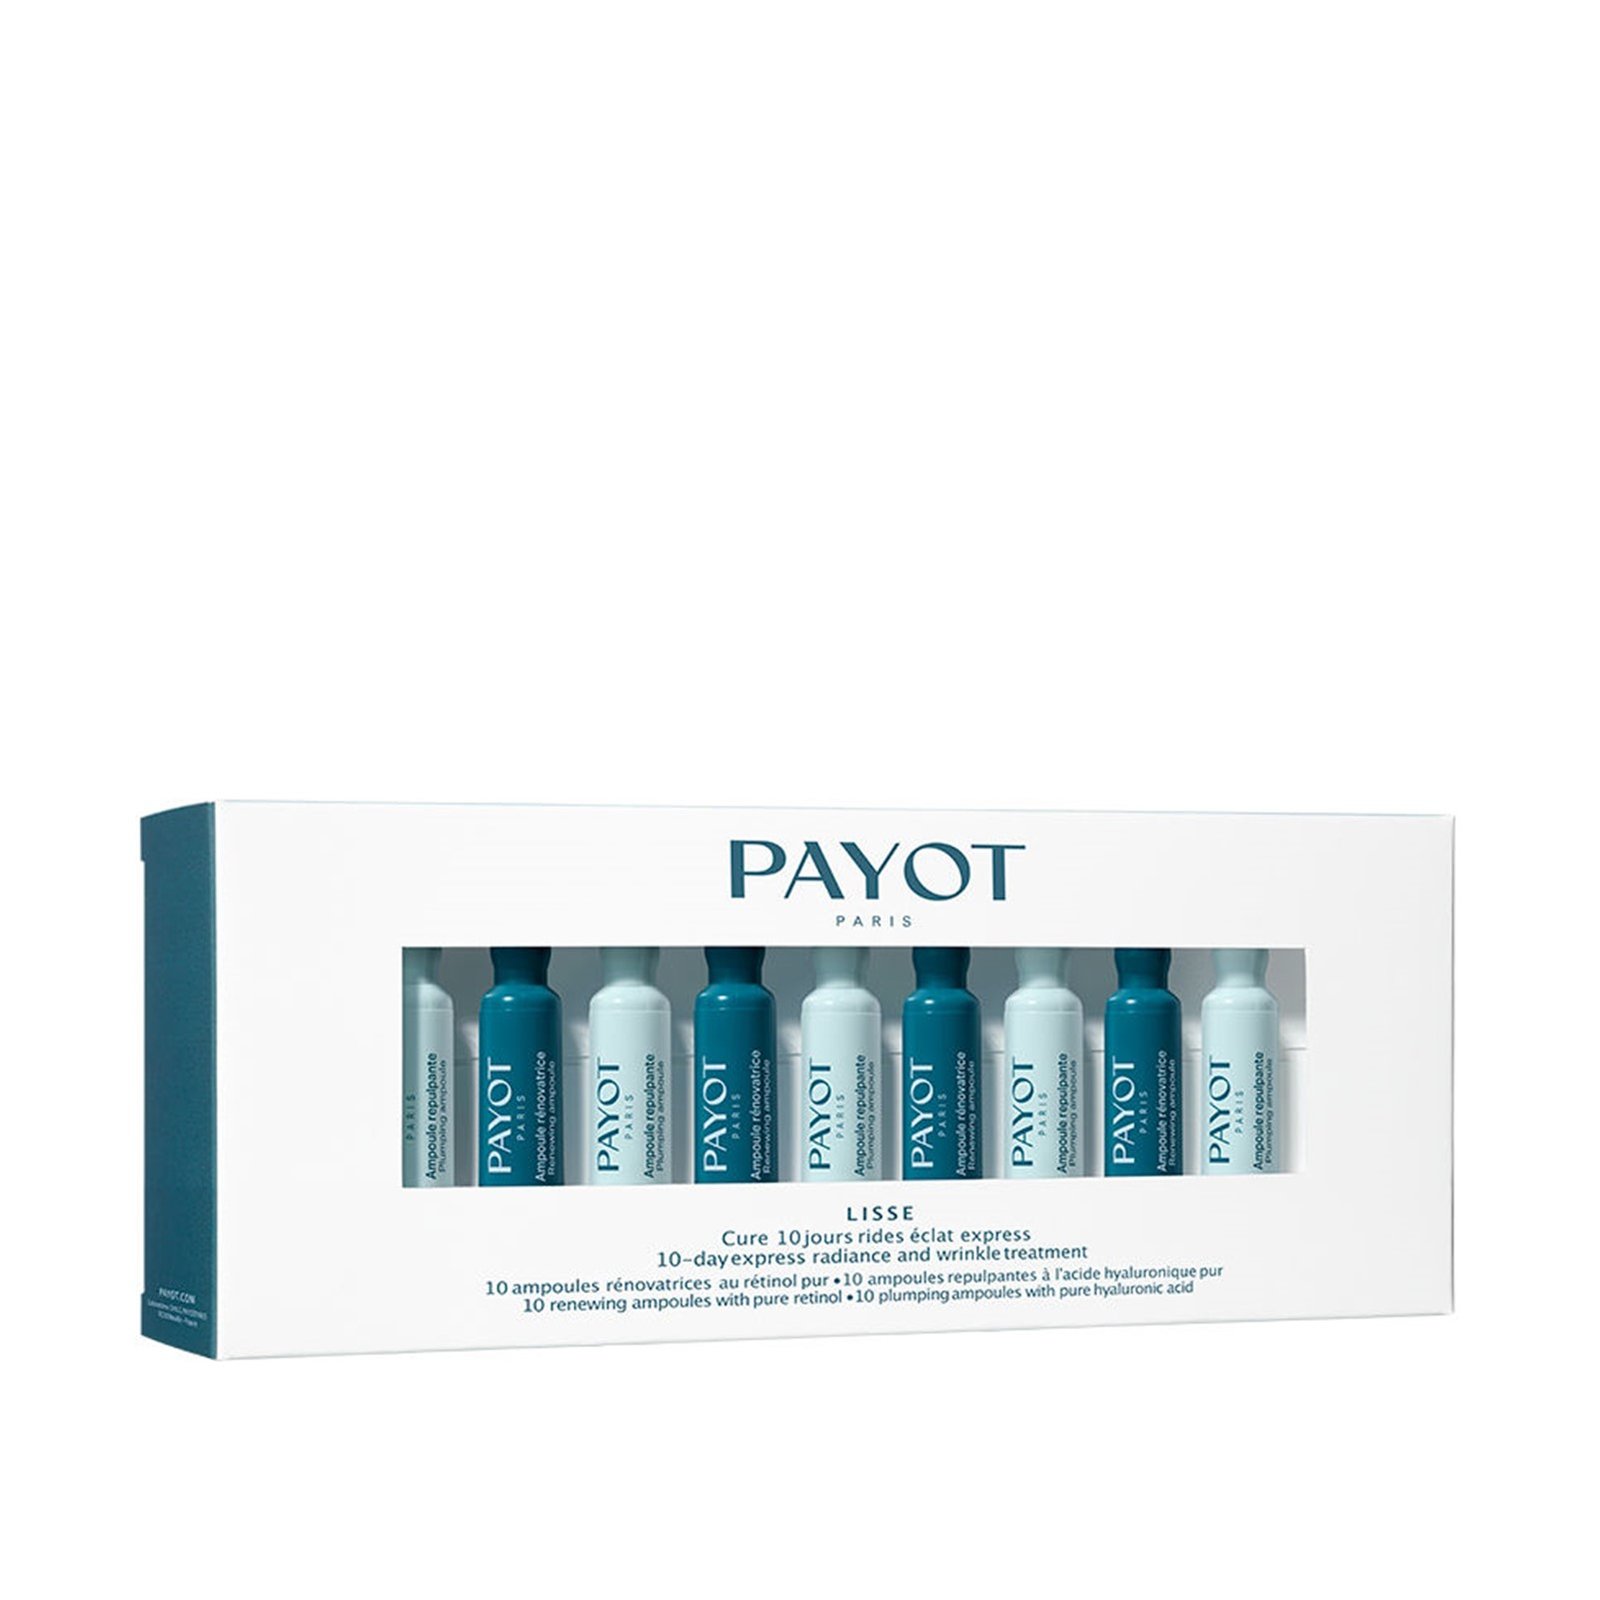 Payot Lisse 10-Day Express Radiance And Wrinkle Treatment 10x1ml (10x0.03 fl oz)